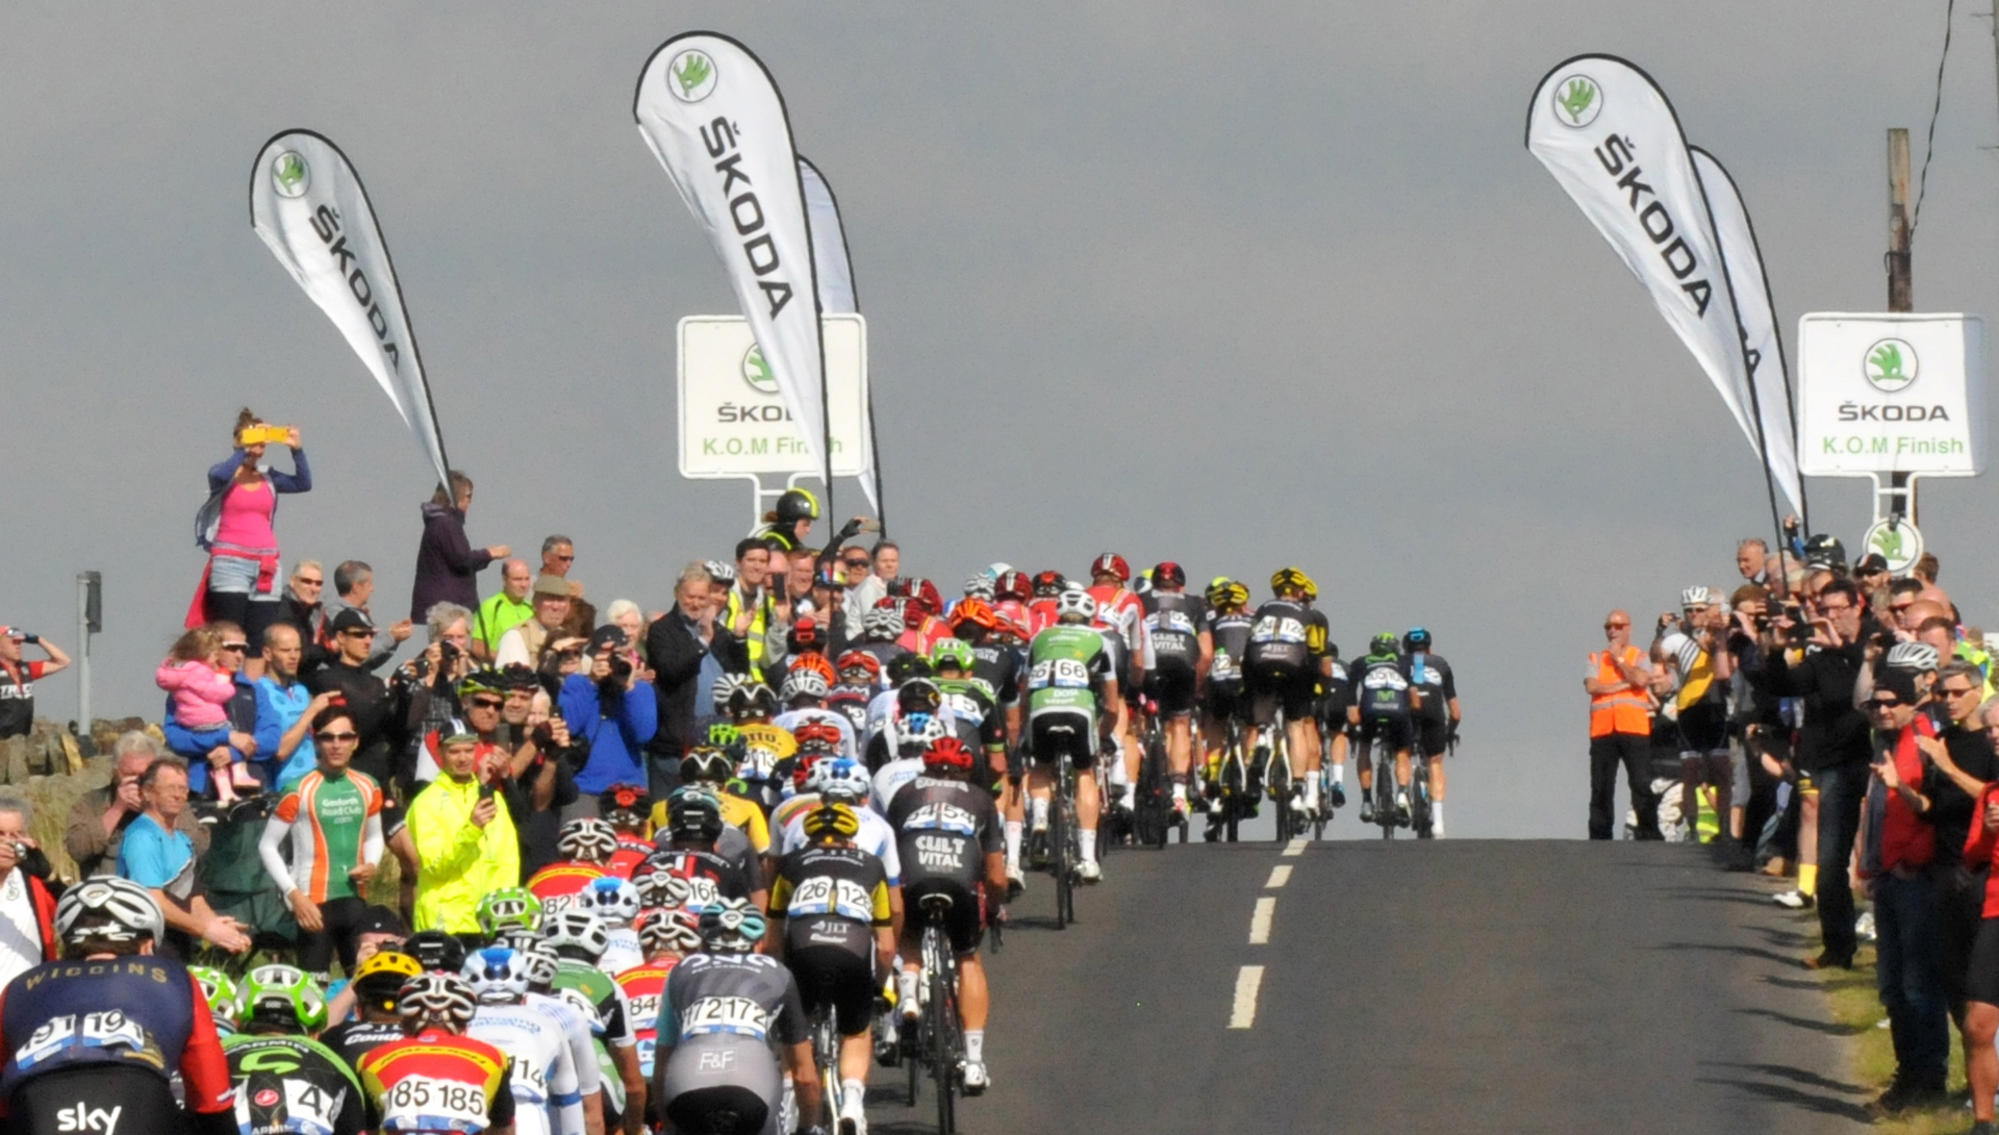 The loss of key partners, such as Škoda, had put financial pressure on organisers The Women's Tour ©The Women's Tour